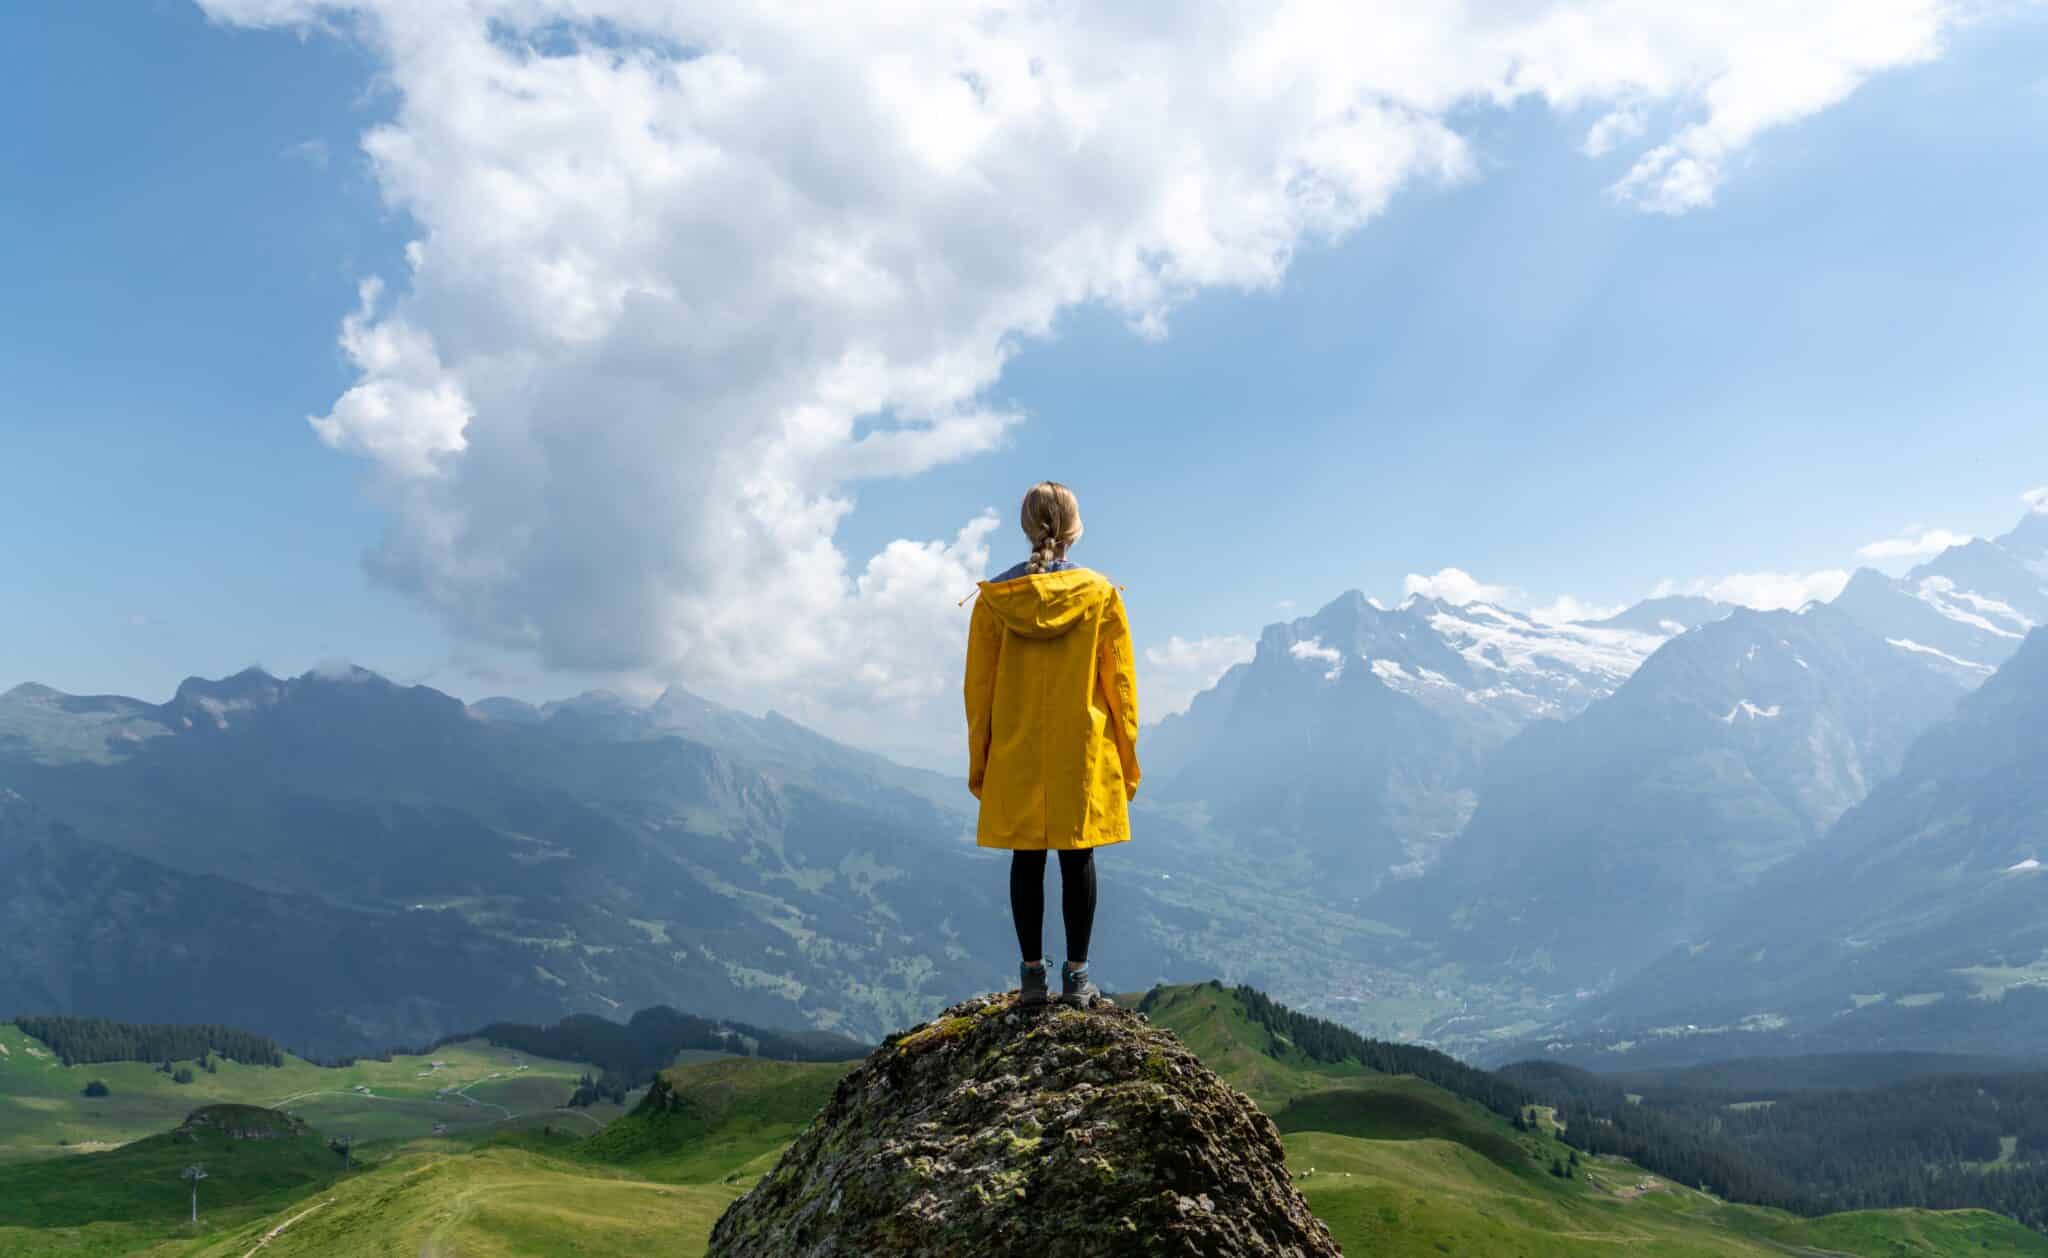 Woman stands on a cliff | Photo by lucas wesney on Unsplash